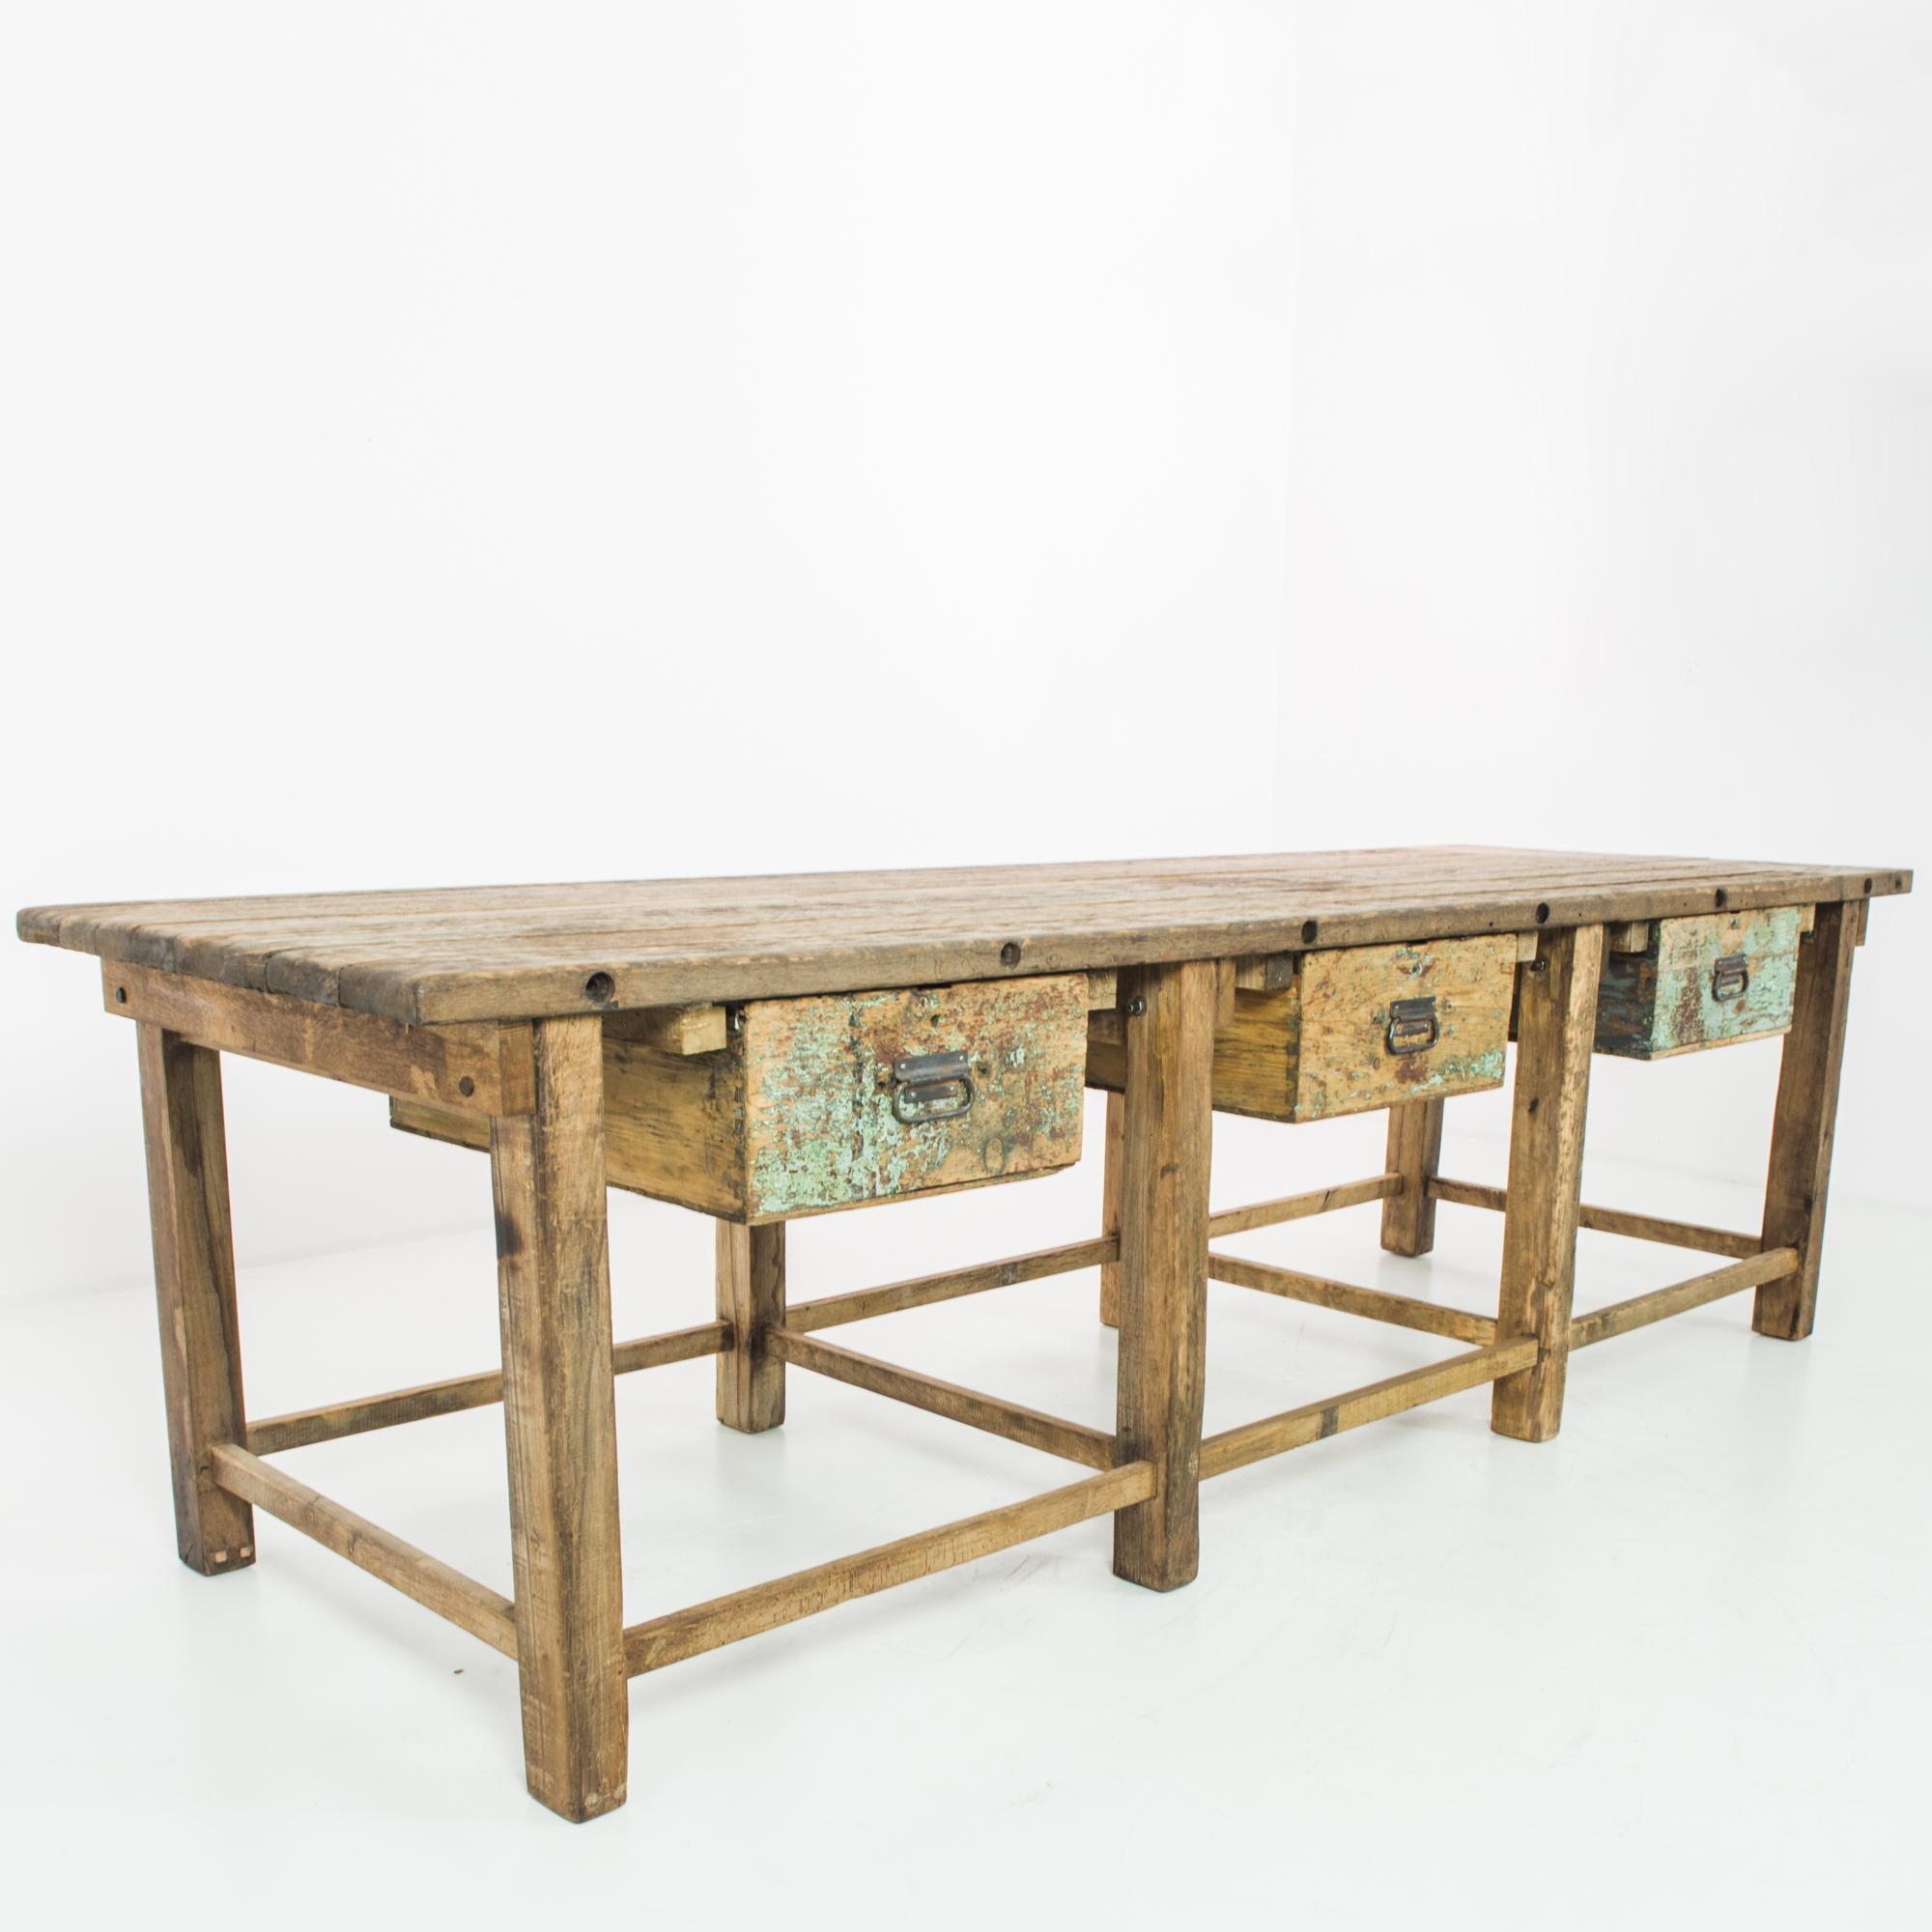 A wooden table from Czechia, produced circa 1950. A work table straight from a mid-century workshop; standing on eight legs, it’s split into three sections around its three sliding drawers. With traces of original patination, nicks, and scars from